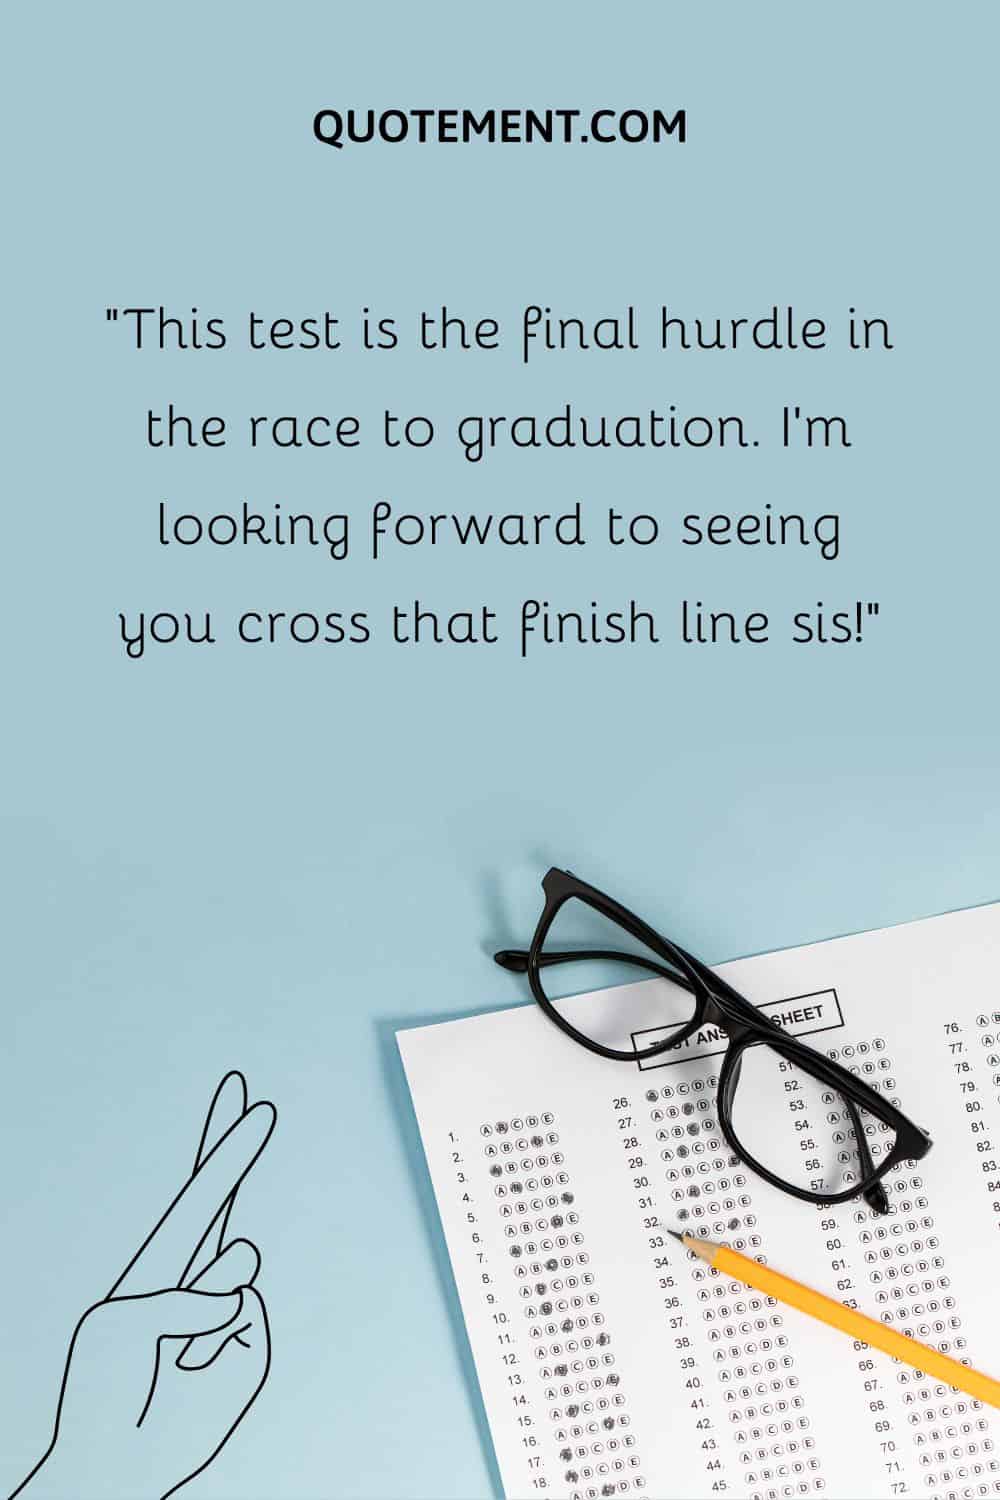 This test is the final hurdle in the race to graduation